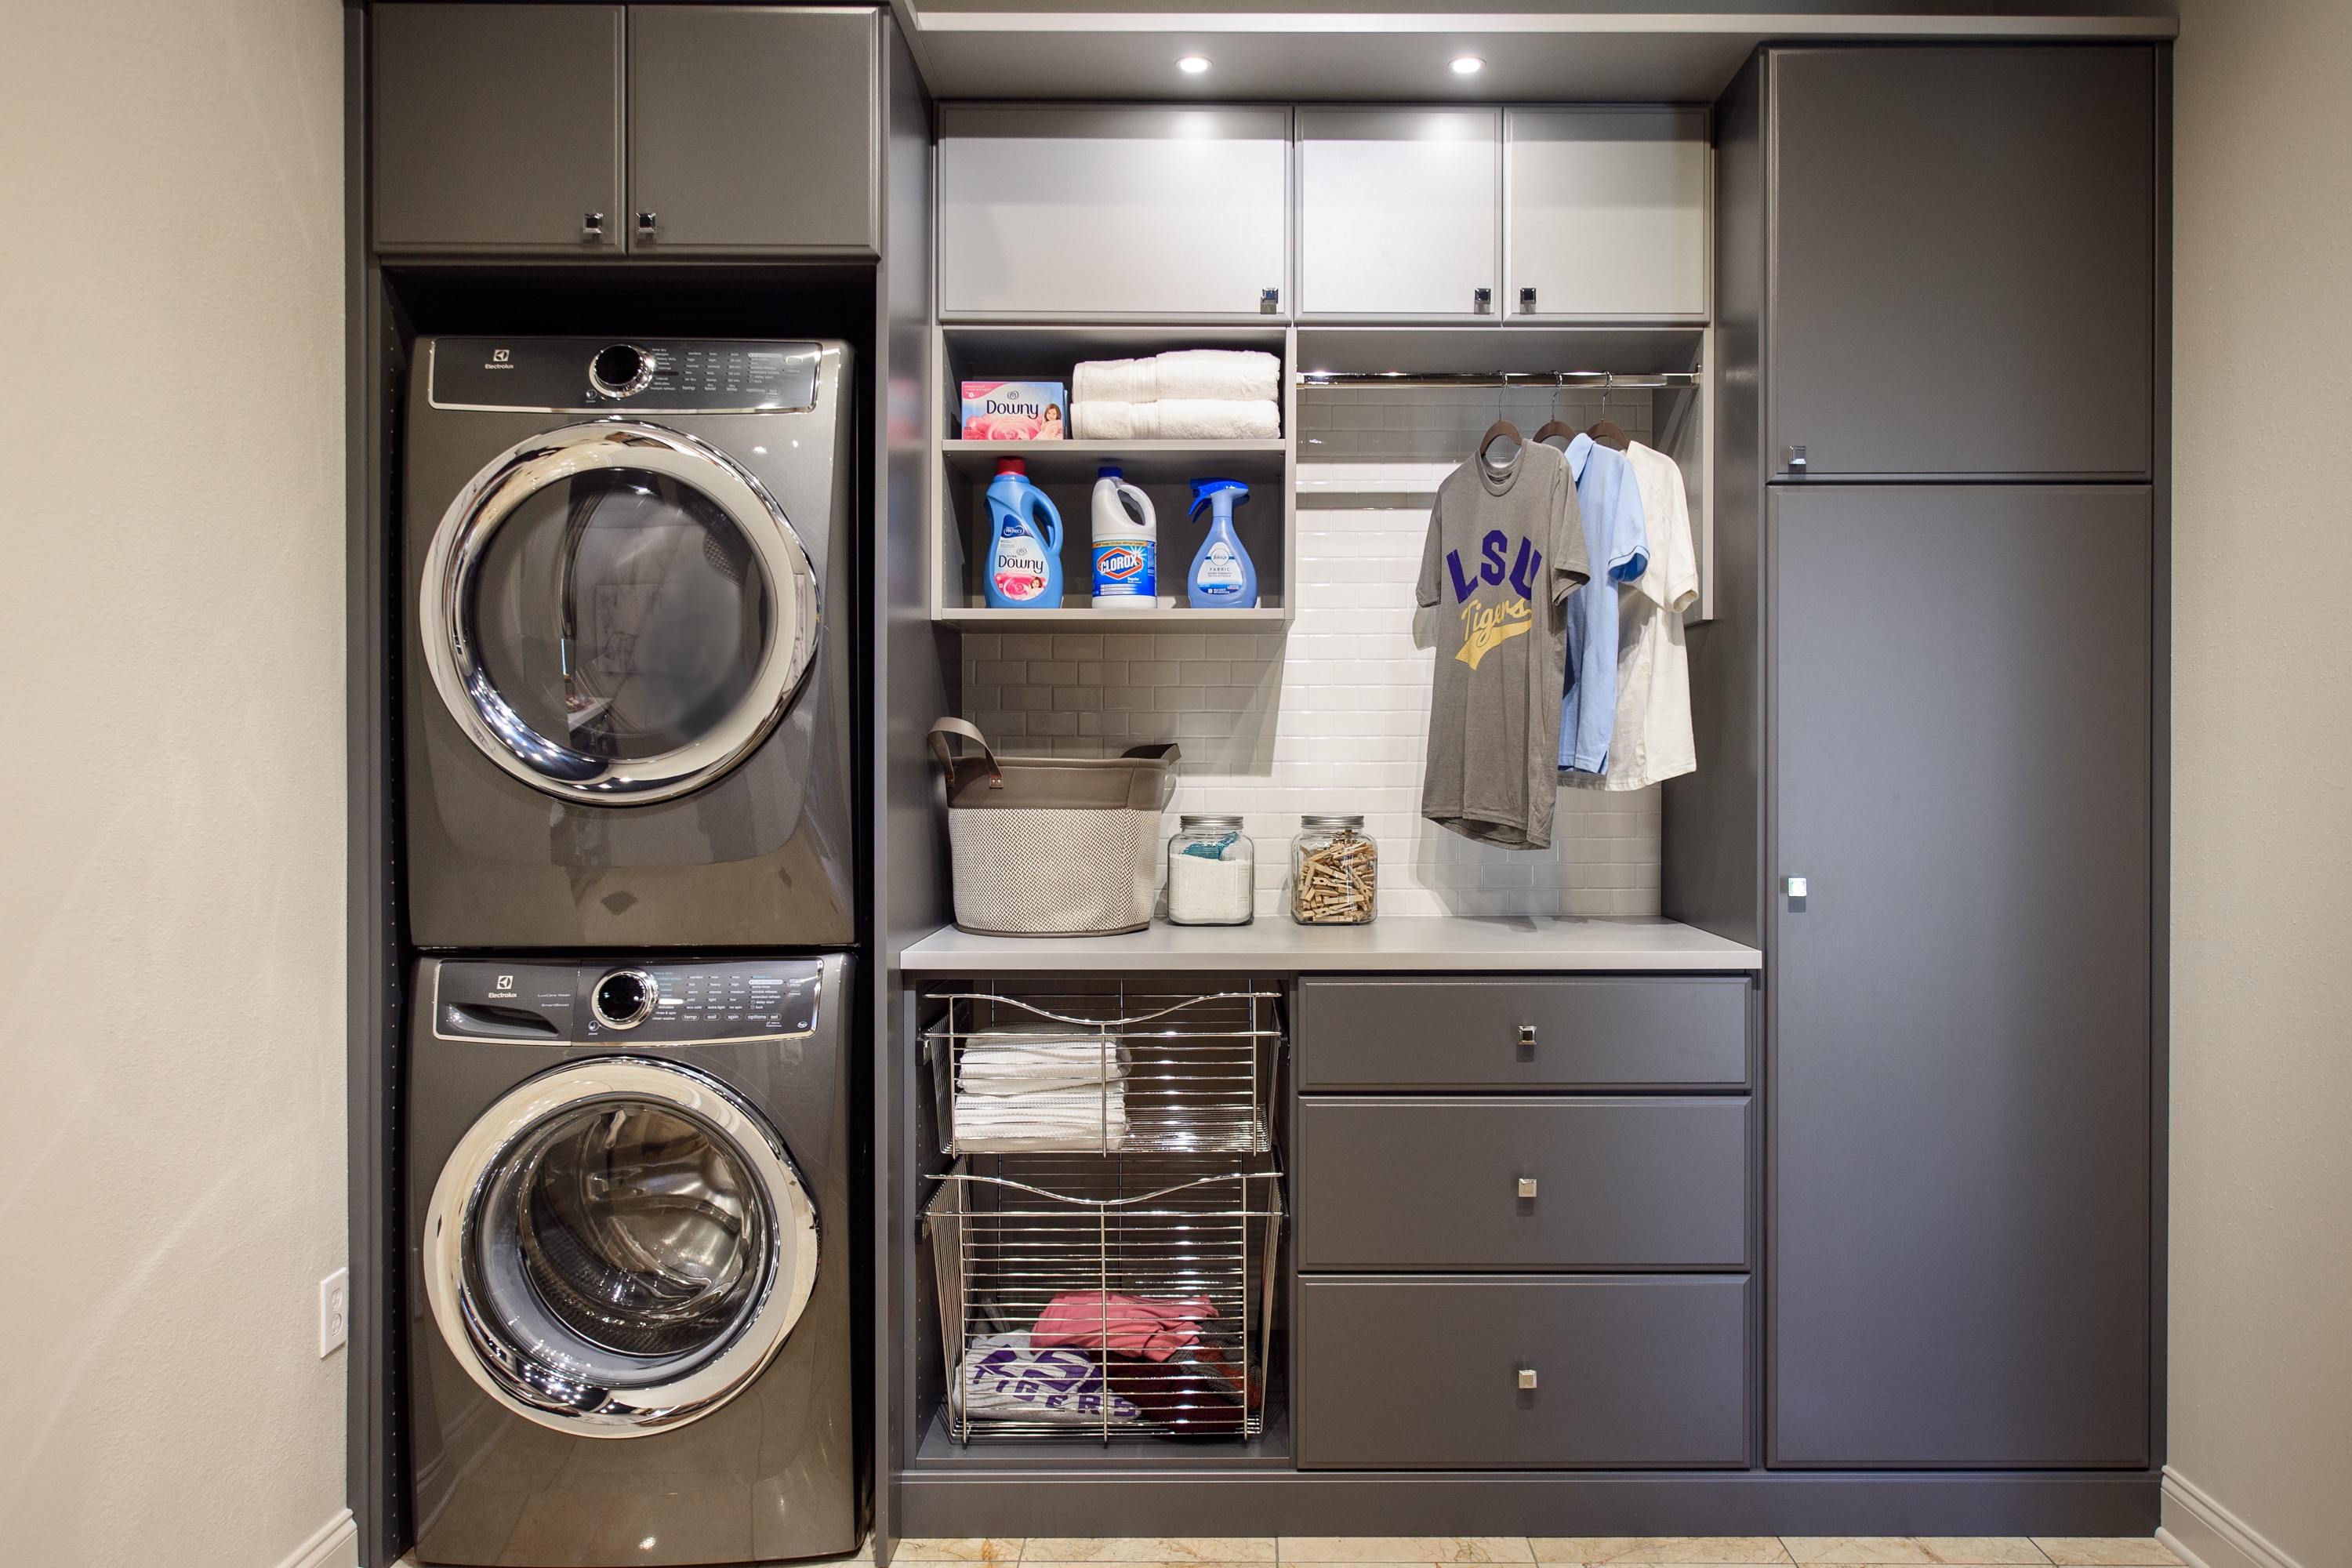 Laundry closet showing washer and dryer as well as clothing baskets, ironing board and shirts on rack